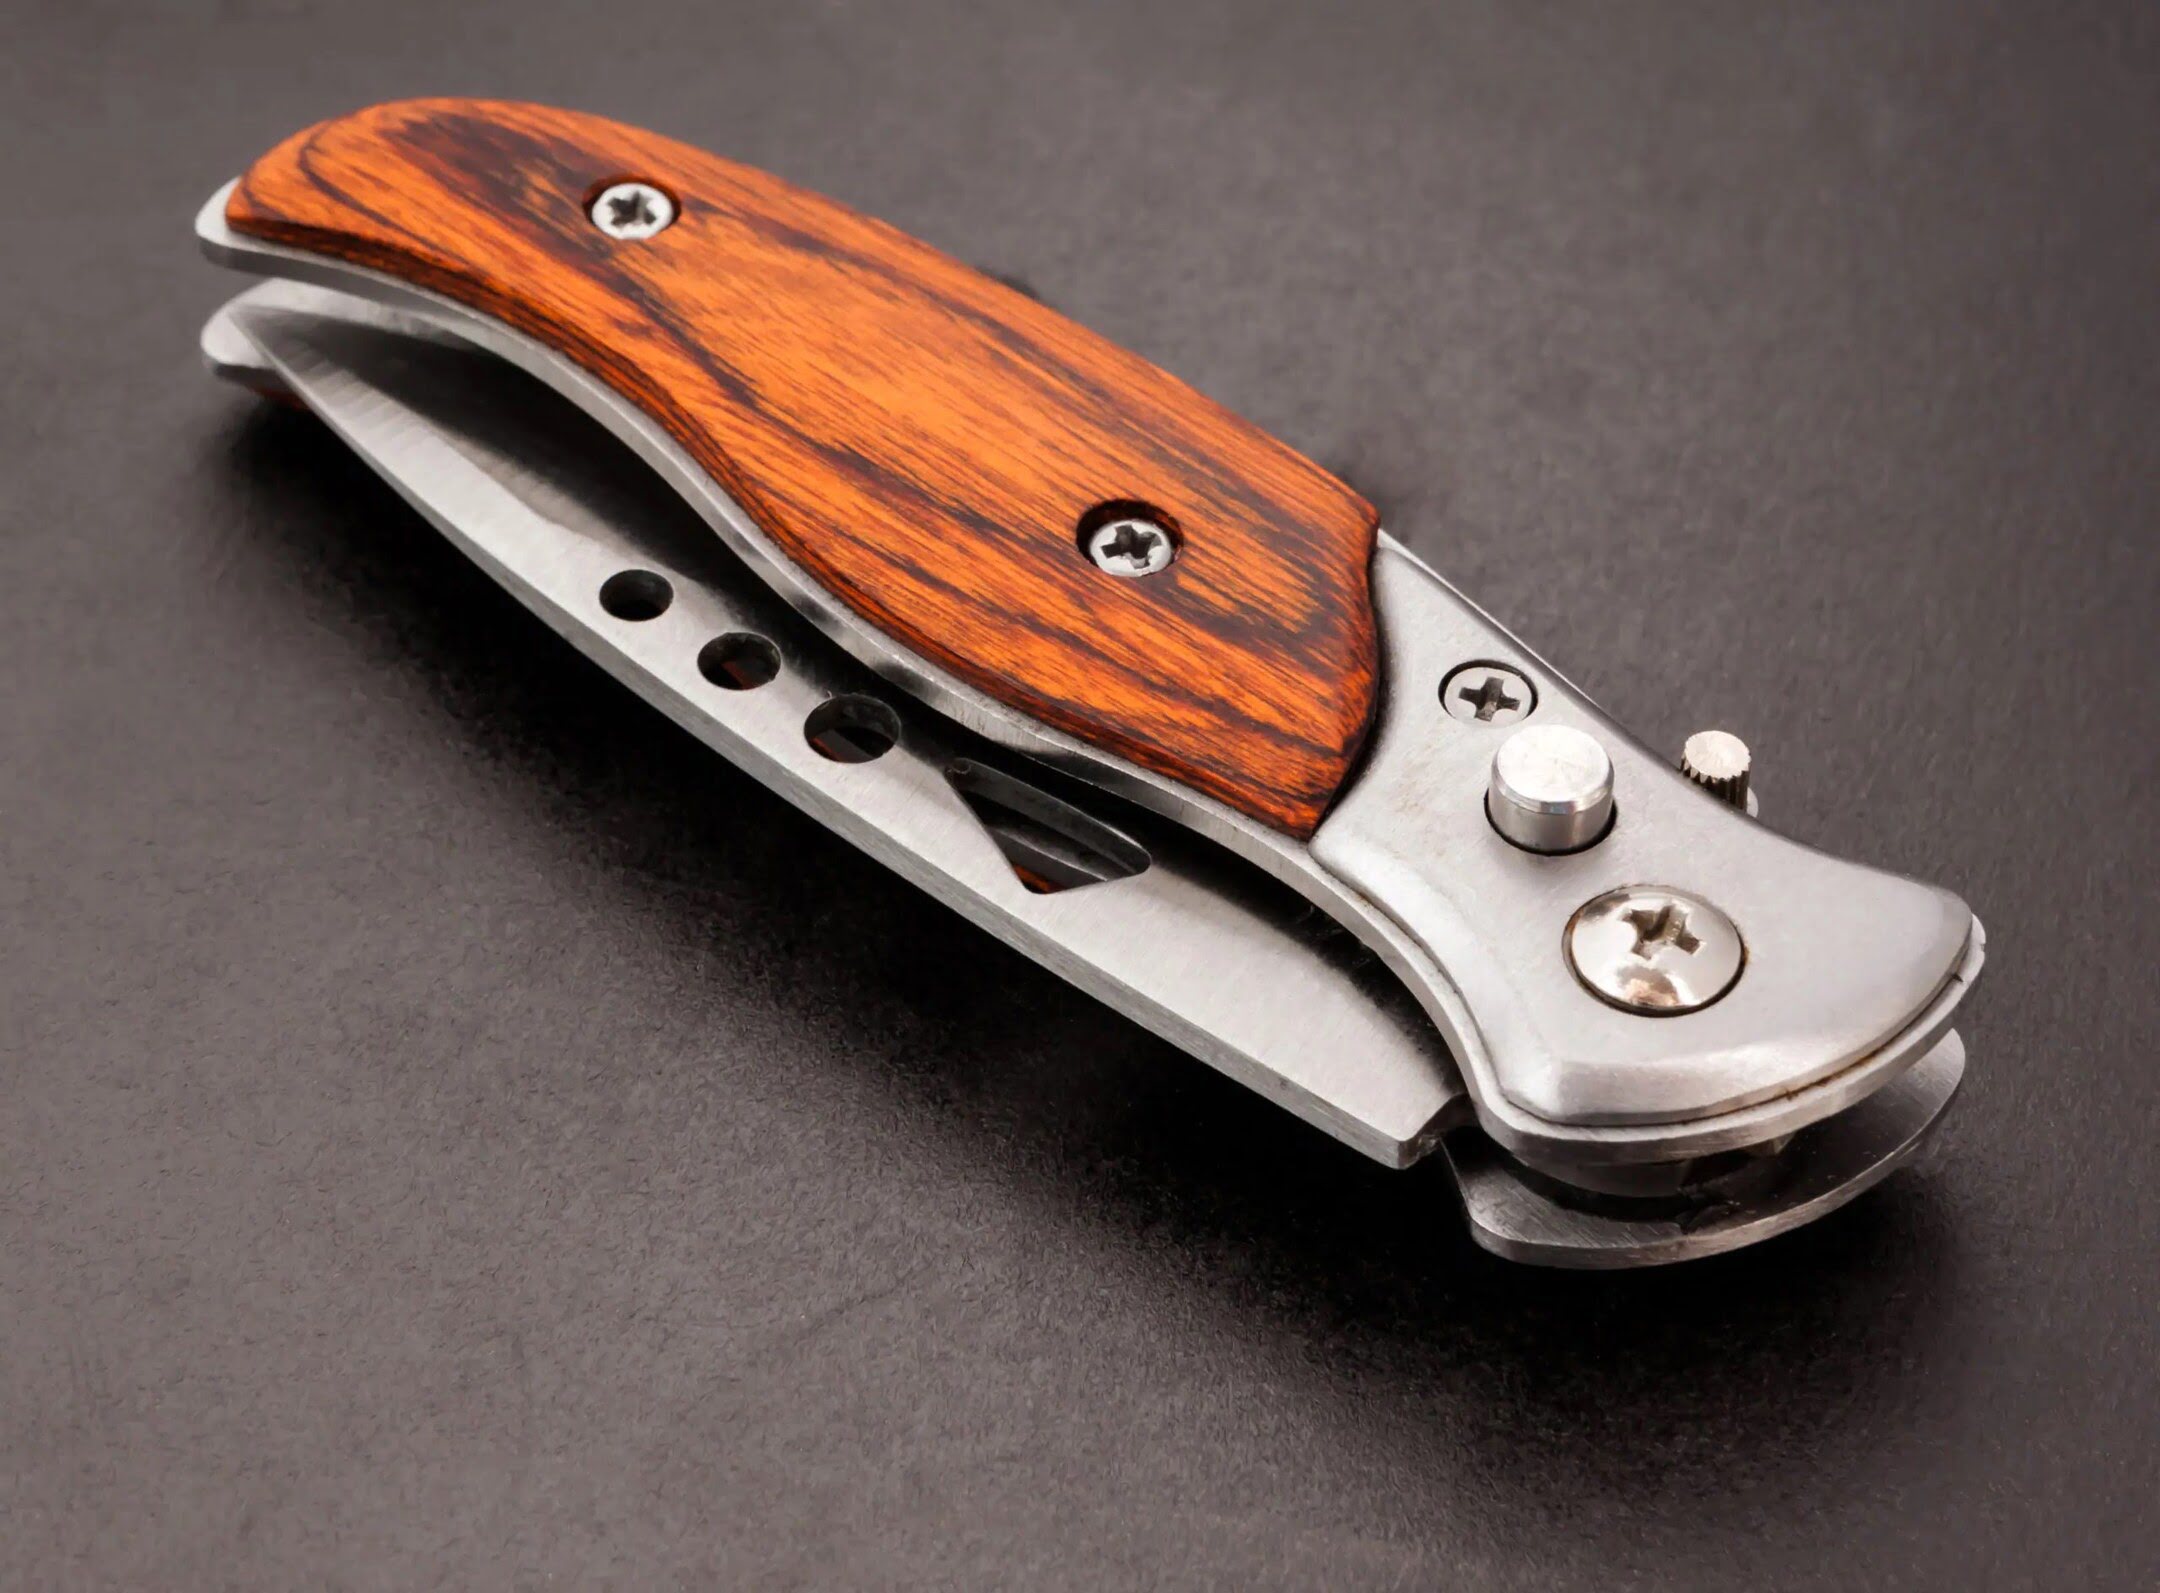 Pocket Knife Review: The Best Options for Everyday Carry